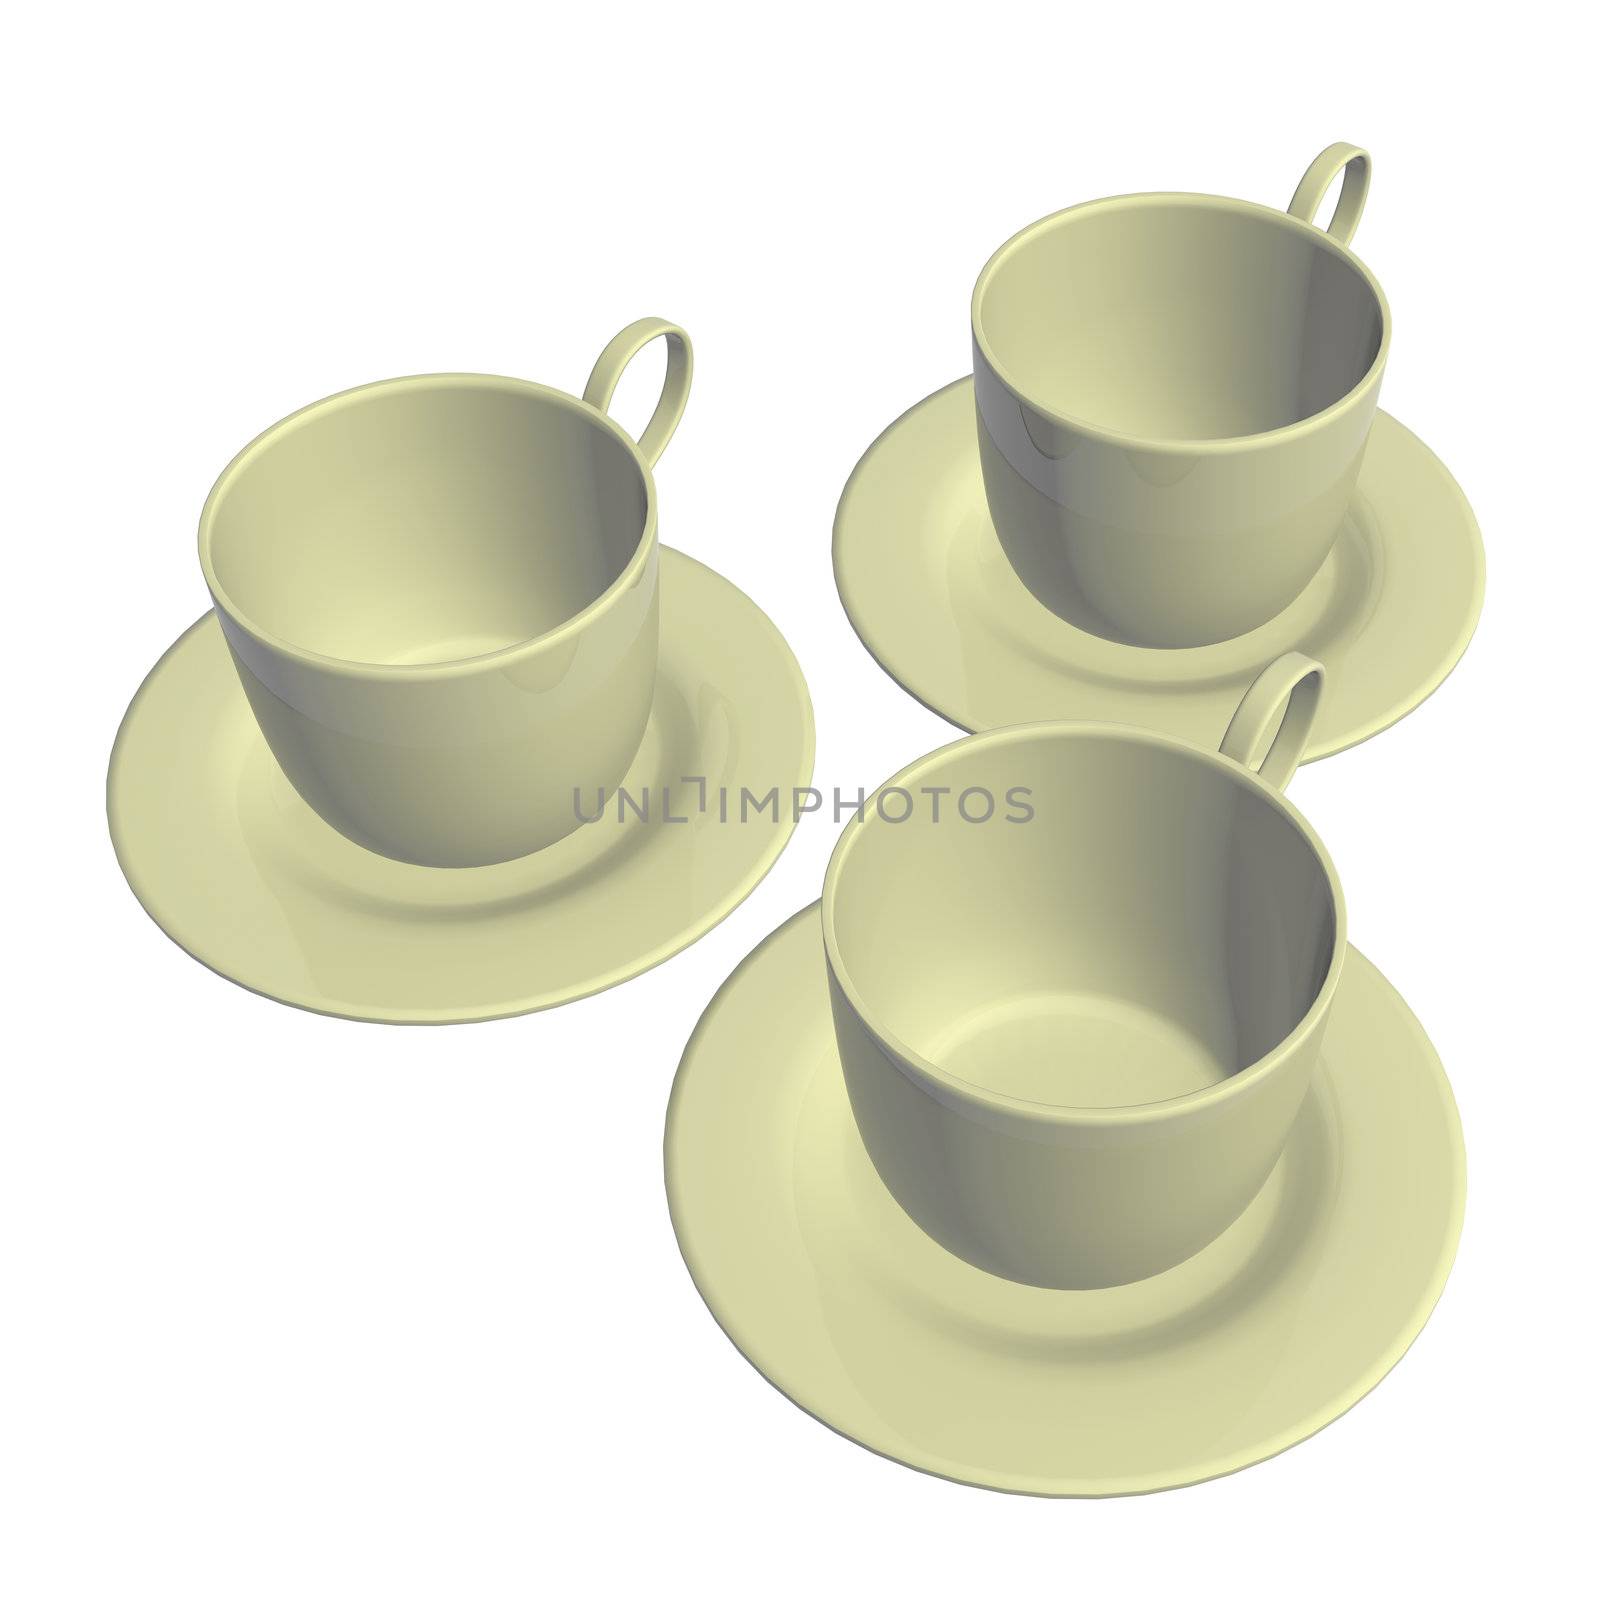 Ceramic tea cups and saucers, 3D illustration, isolated against a white background